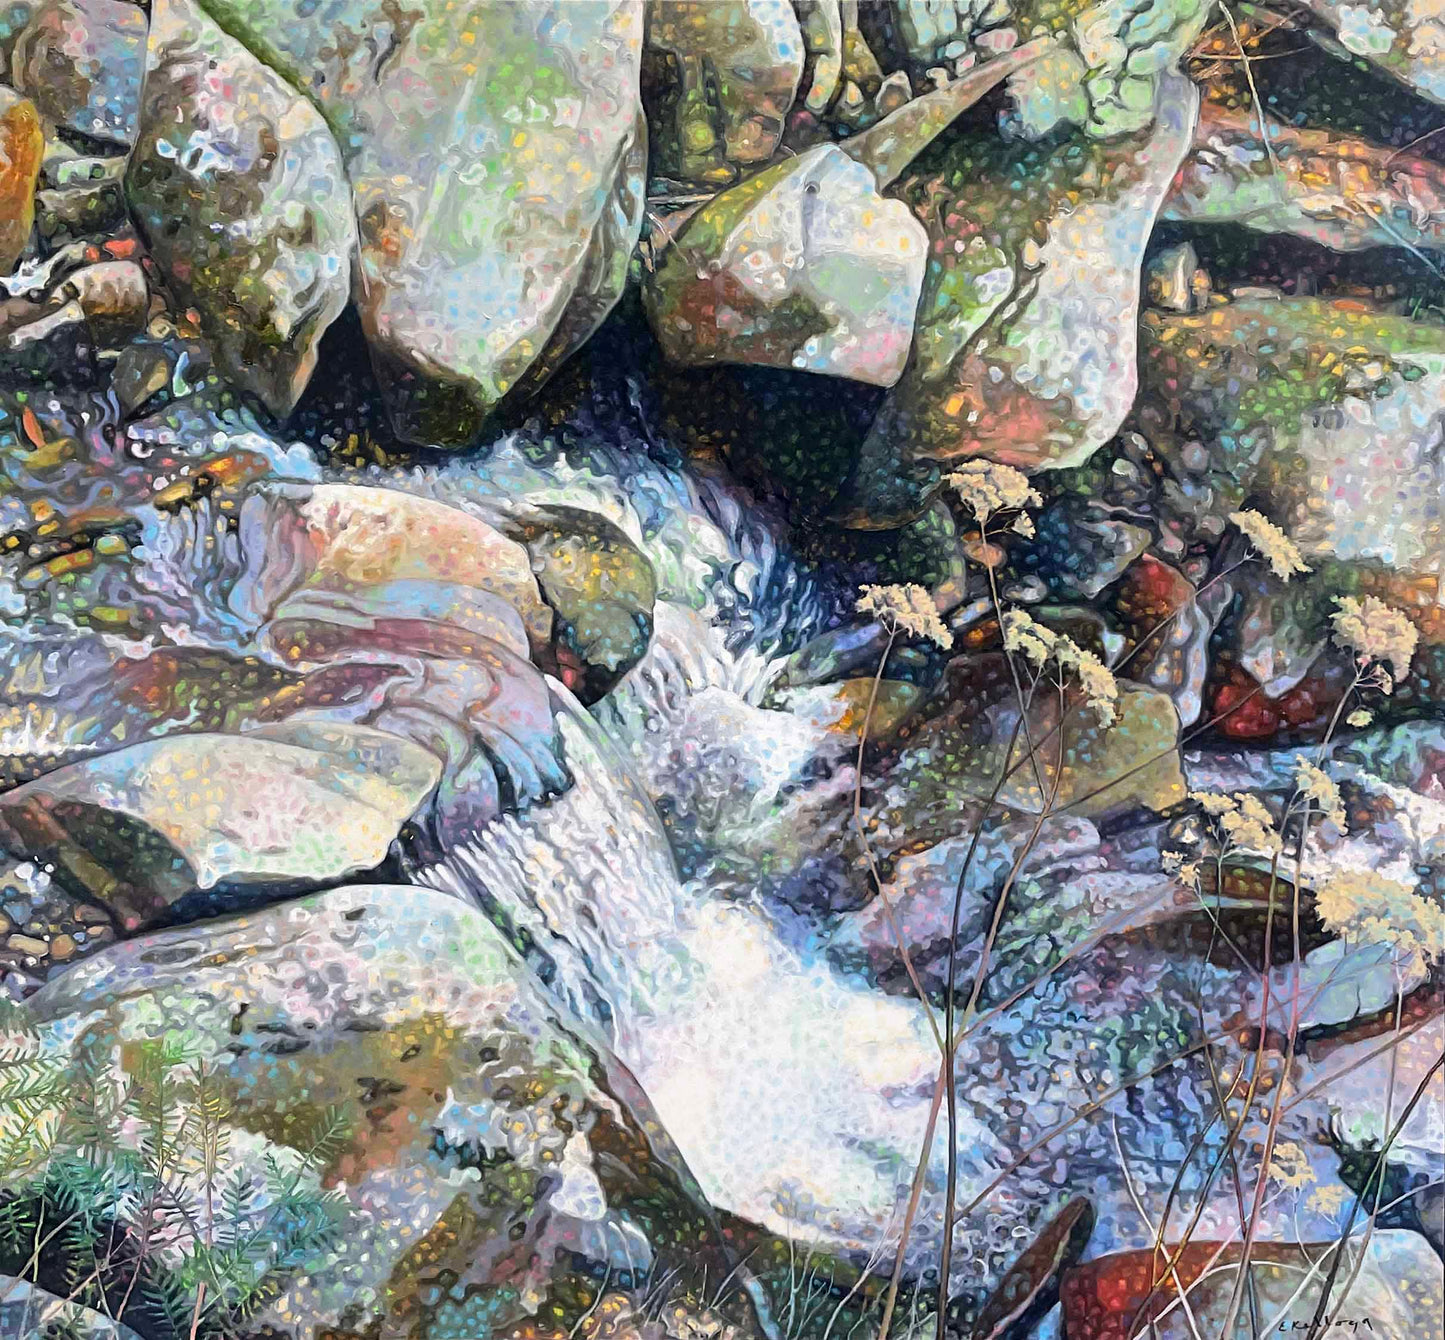 Stream by Glen Falls © Edward Kellogg, Oil, 37 X 40 inches. Shipping to be determined after final purchase.